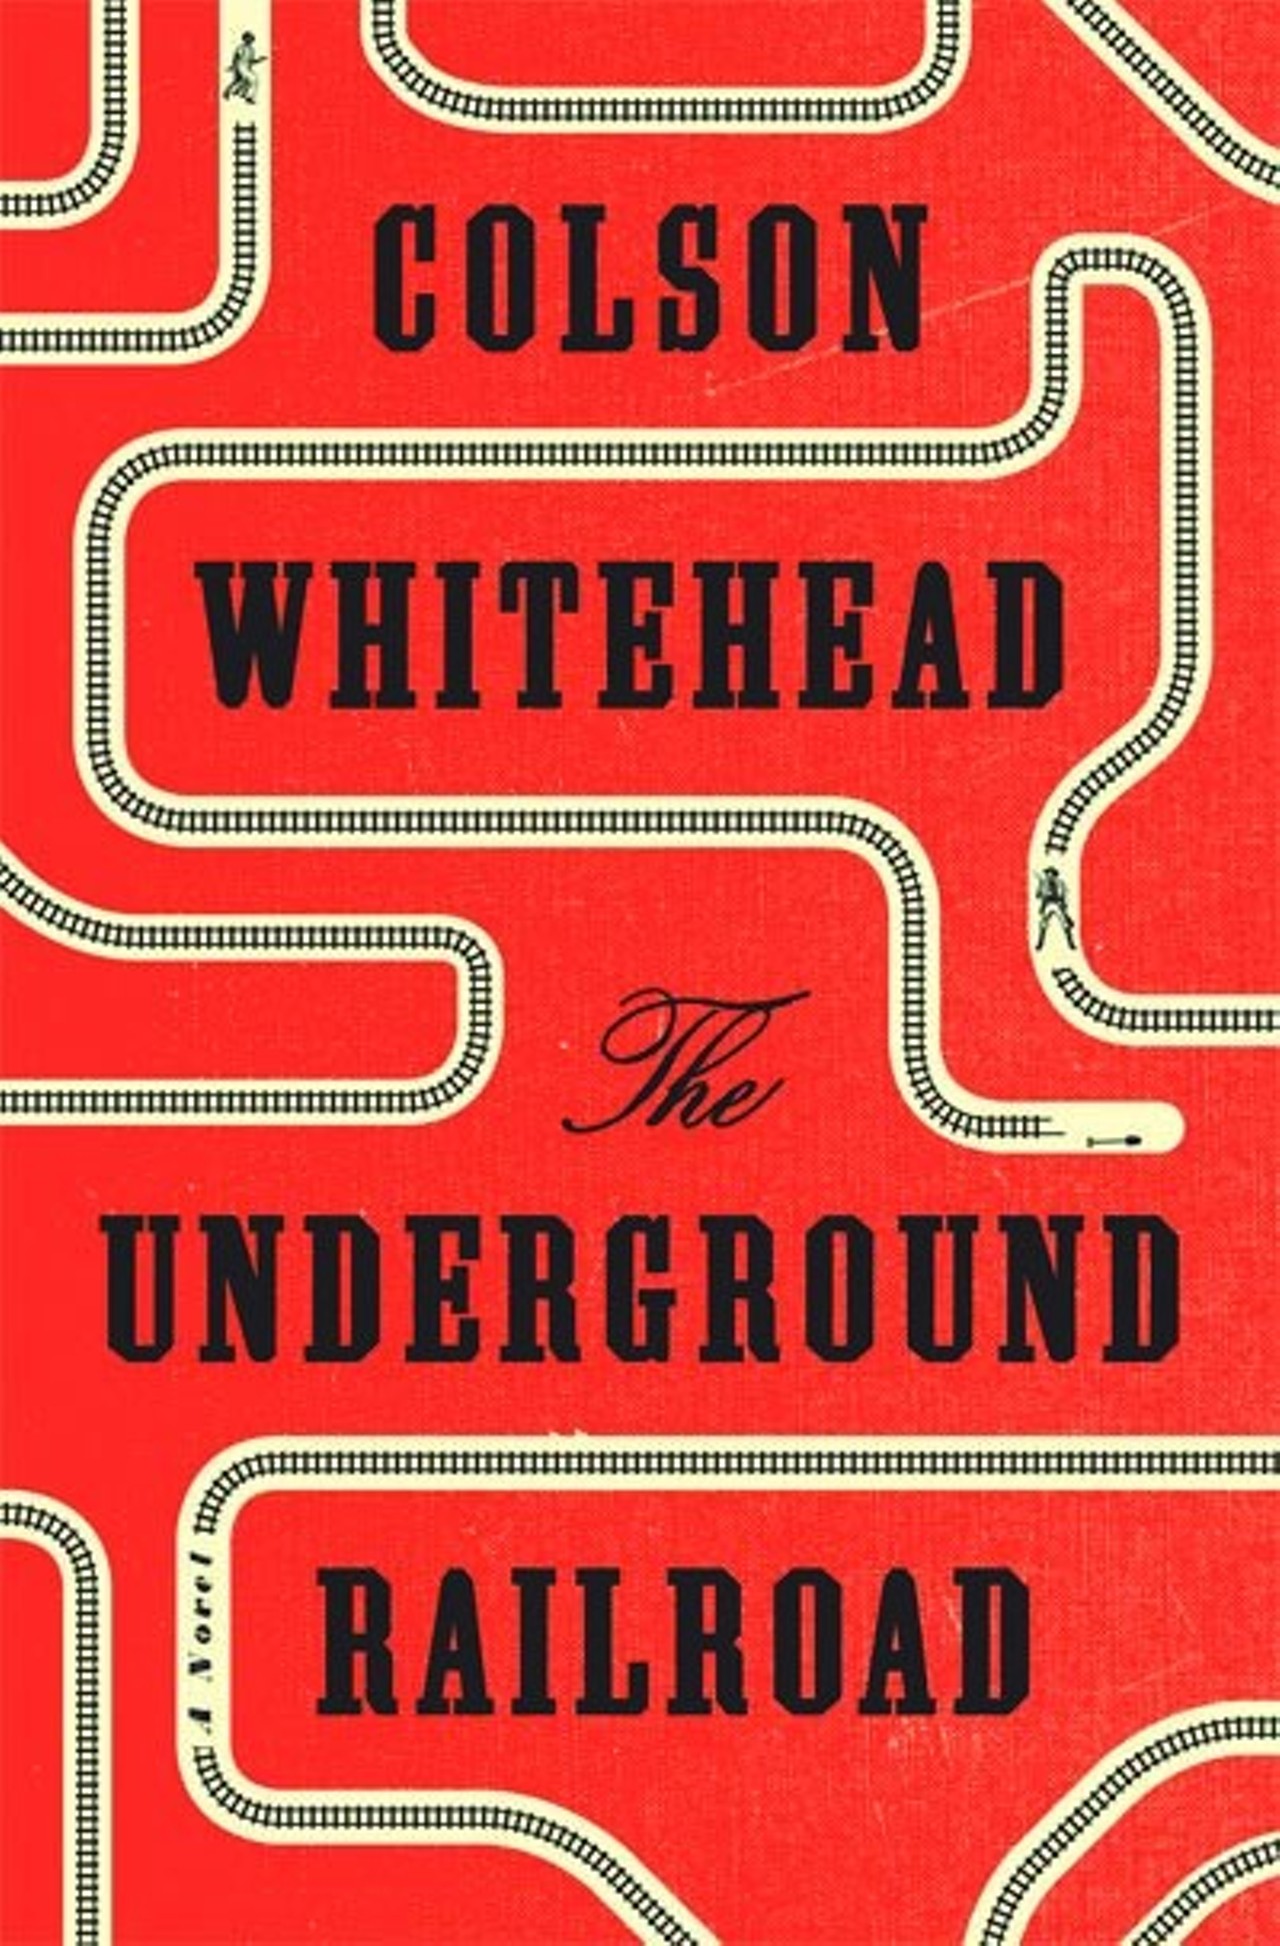 Underground Railroad by Colson Whitehead -
The winner of the National Book Award for Fiction is on every year-end must-read list and for good reason. Whitehead's sixth novel, about two slaves on the run from a cotton plantation, is historical fiction with a twist. Whitehead turns the metaphorical underground railroad into an actual railroad, with trains, engineers and conductors all throughout the South helping escaped slaves find their way to freedom.